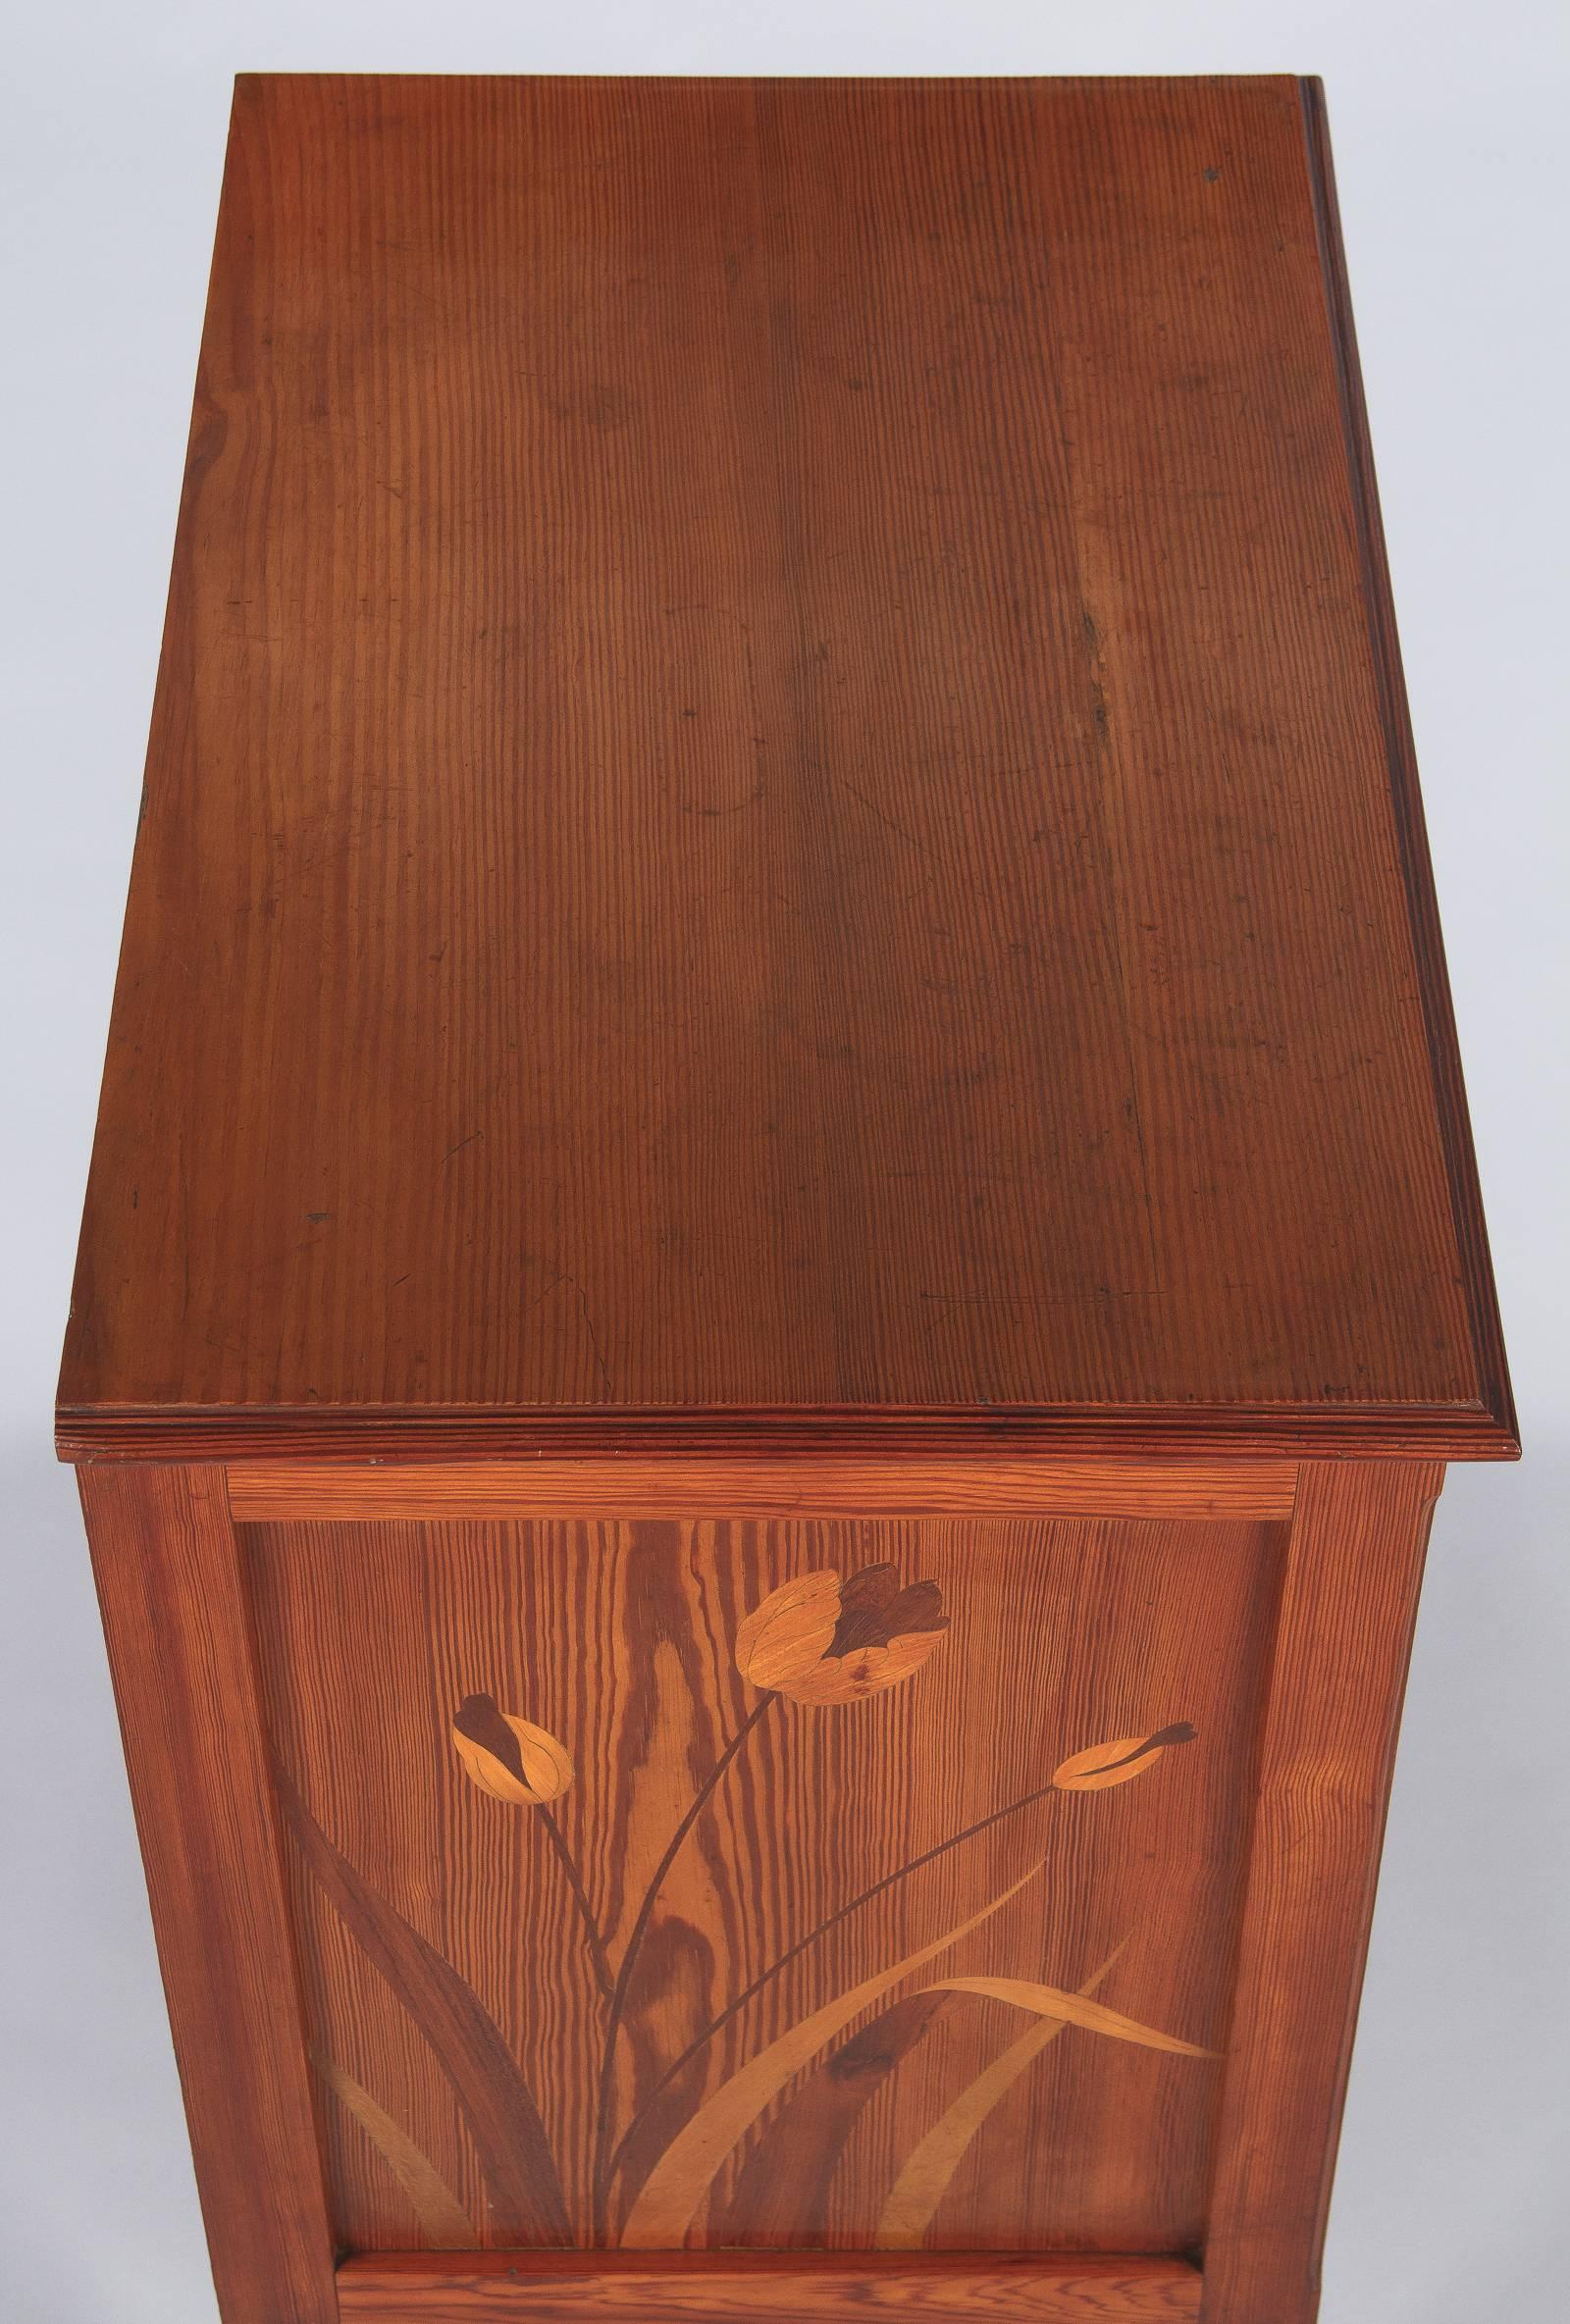 20th Century French Art Nouveau Longleaf Pine Chest of Drawers, 1900s